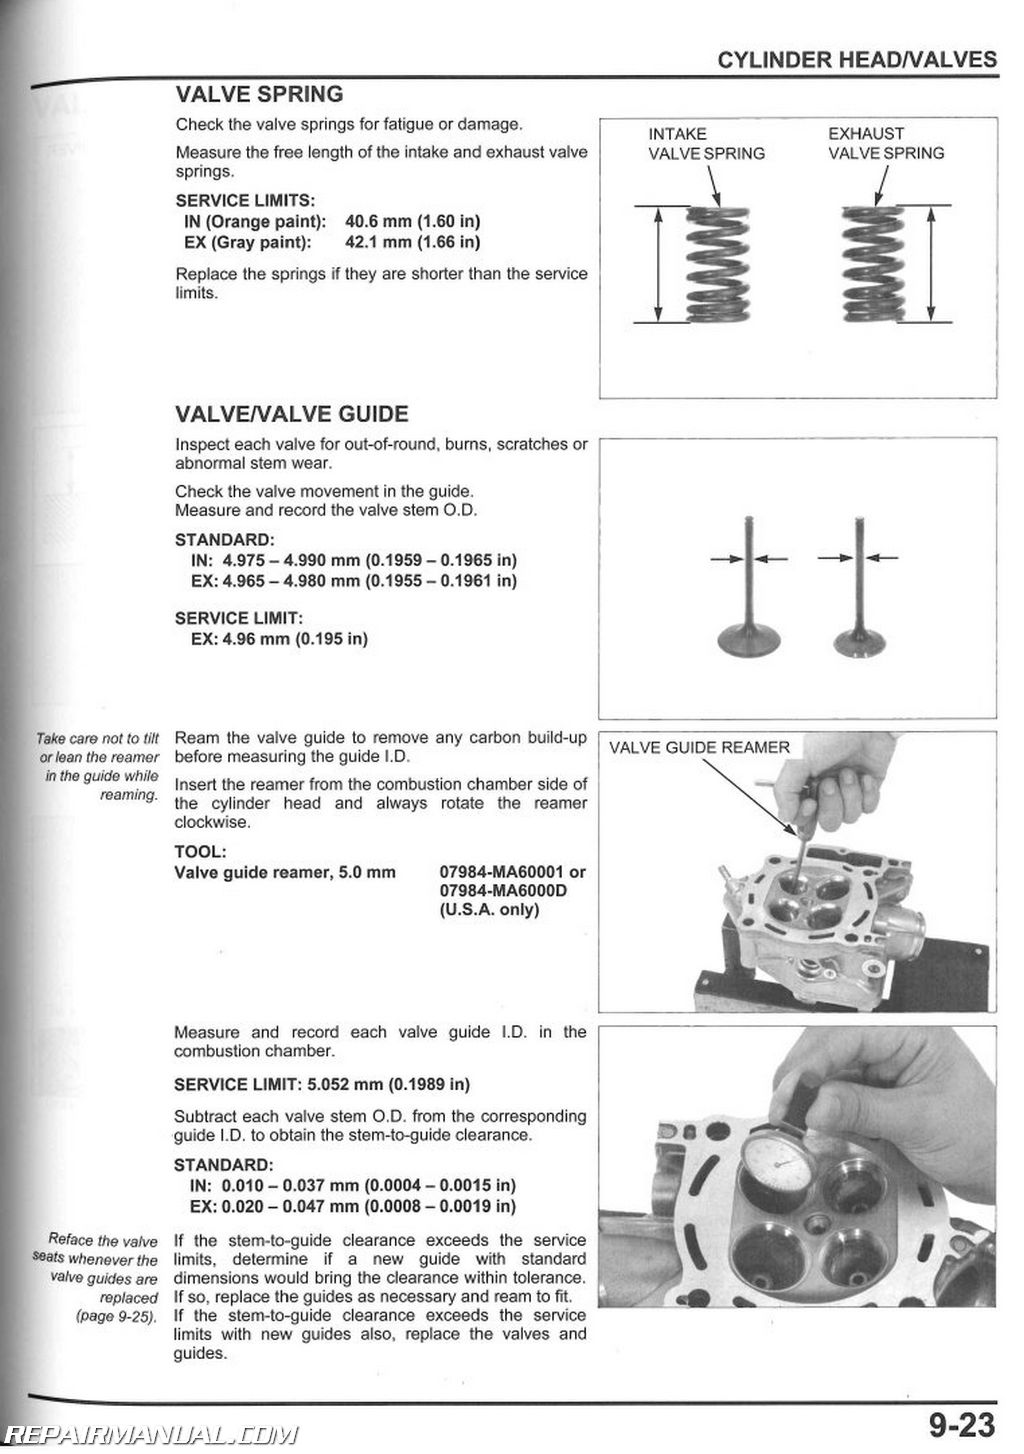 Grizzly parts manuals